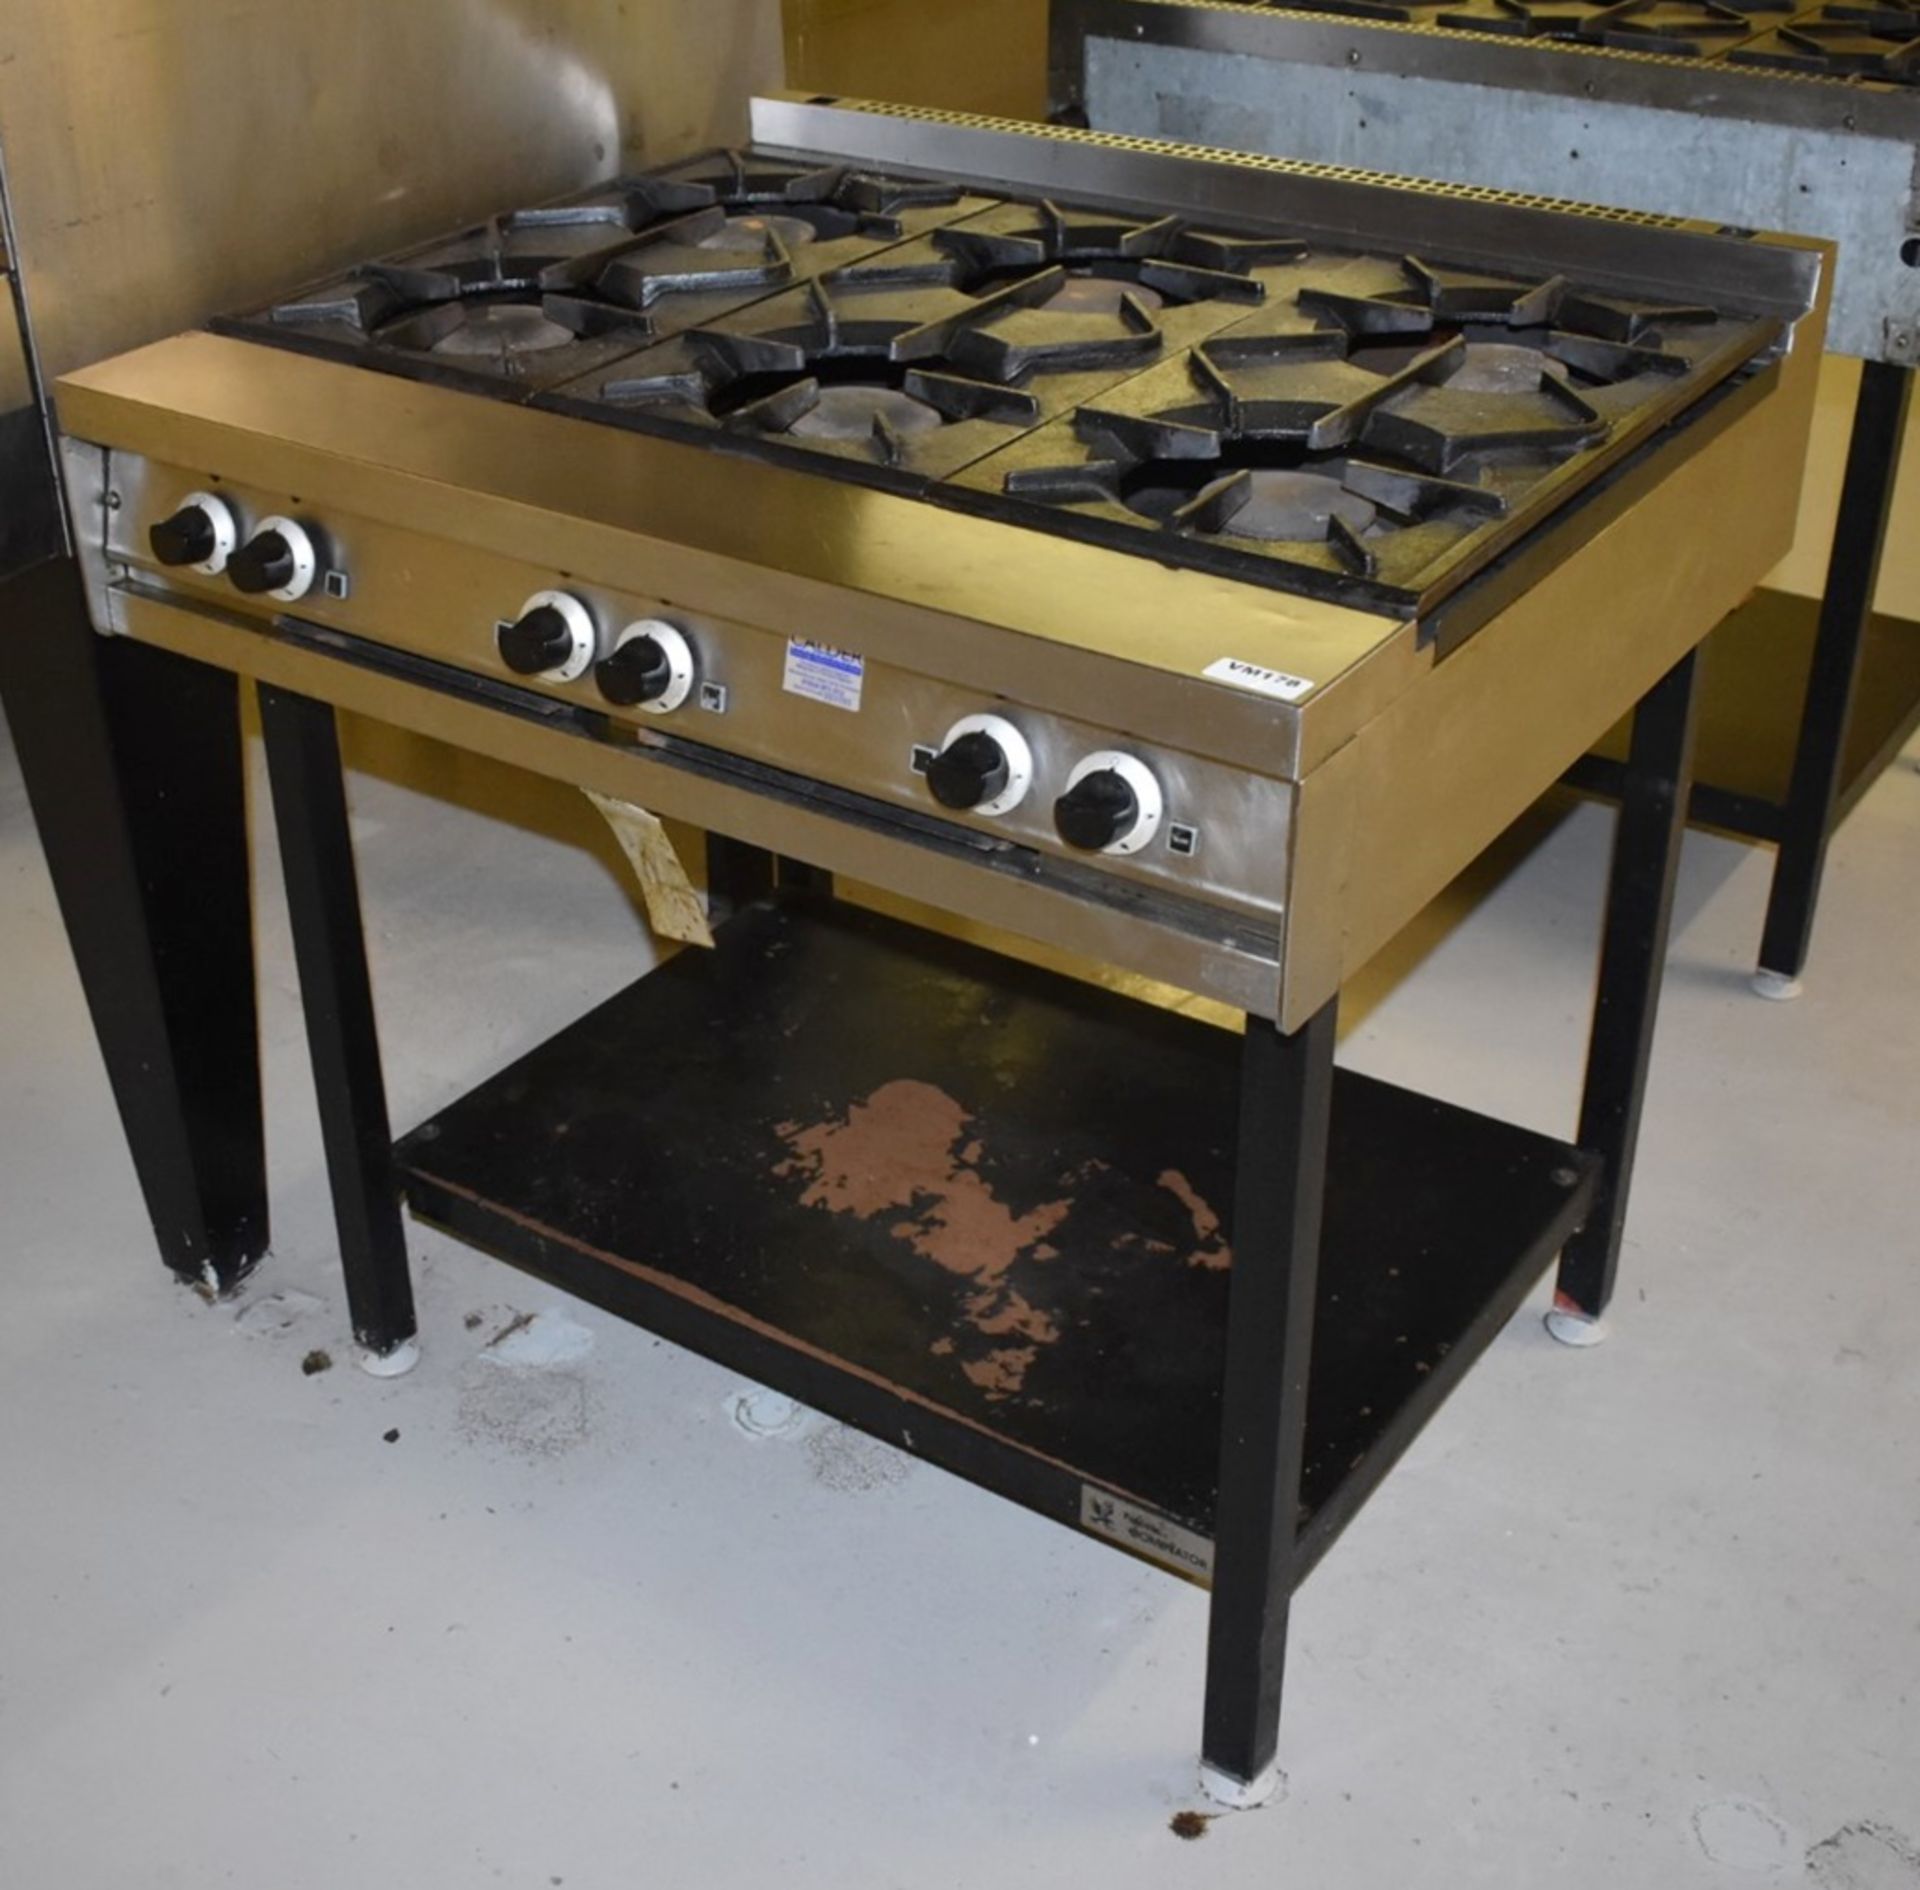 1 x Falcon Dominator Six Burner Gas Range Cooker With Stand - Stainless Steel Exterior - H86 x W90 x